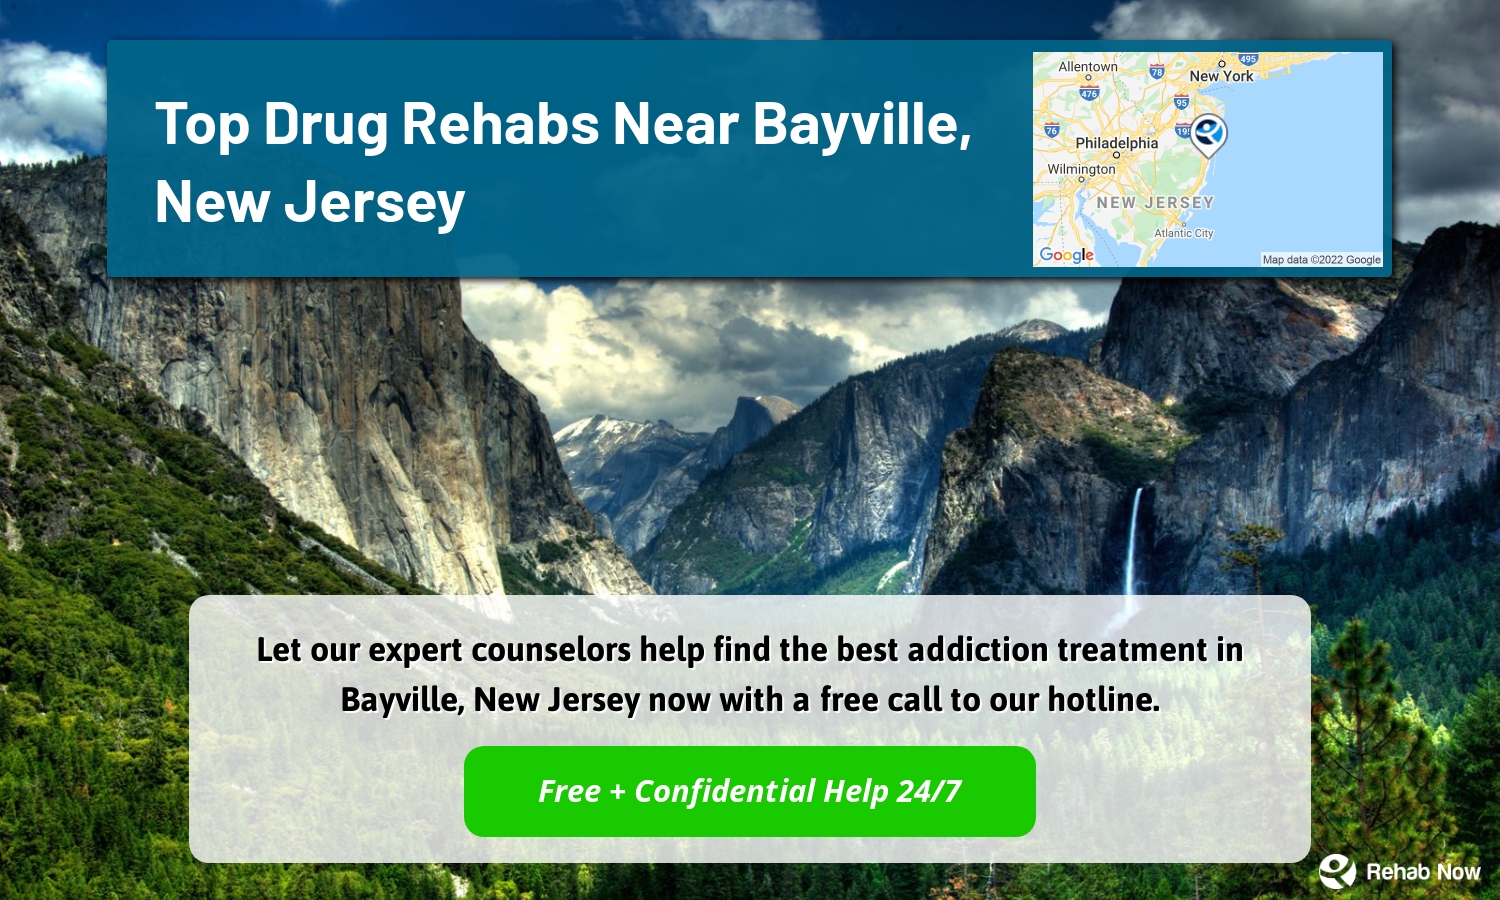 Let our expert counselors help find the best addiction treatment in Bayville, New Jersey now with a free call to our hotline.